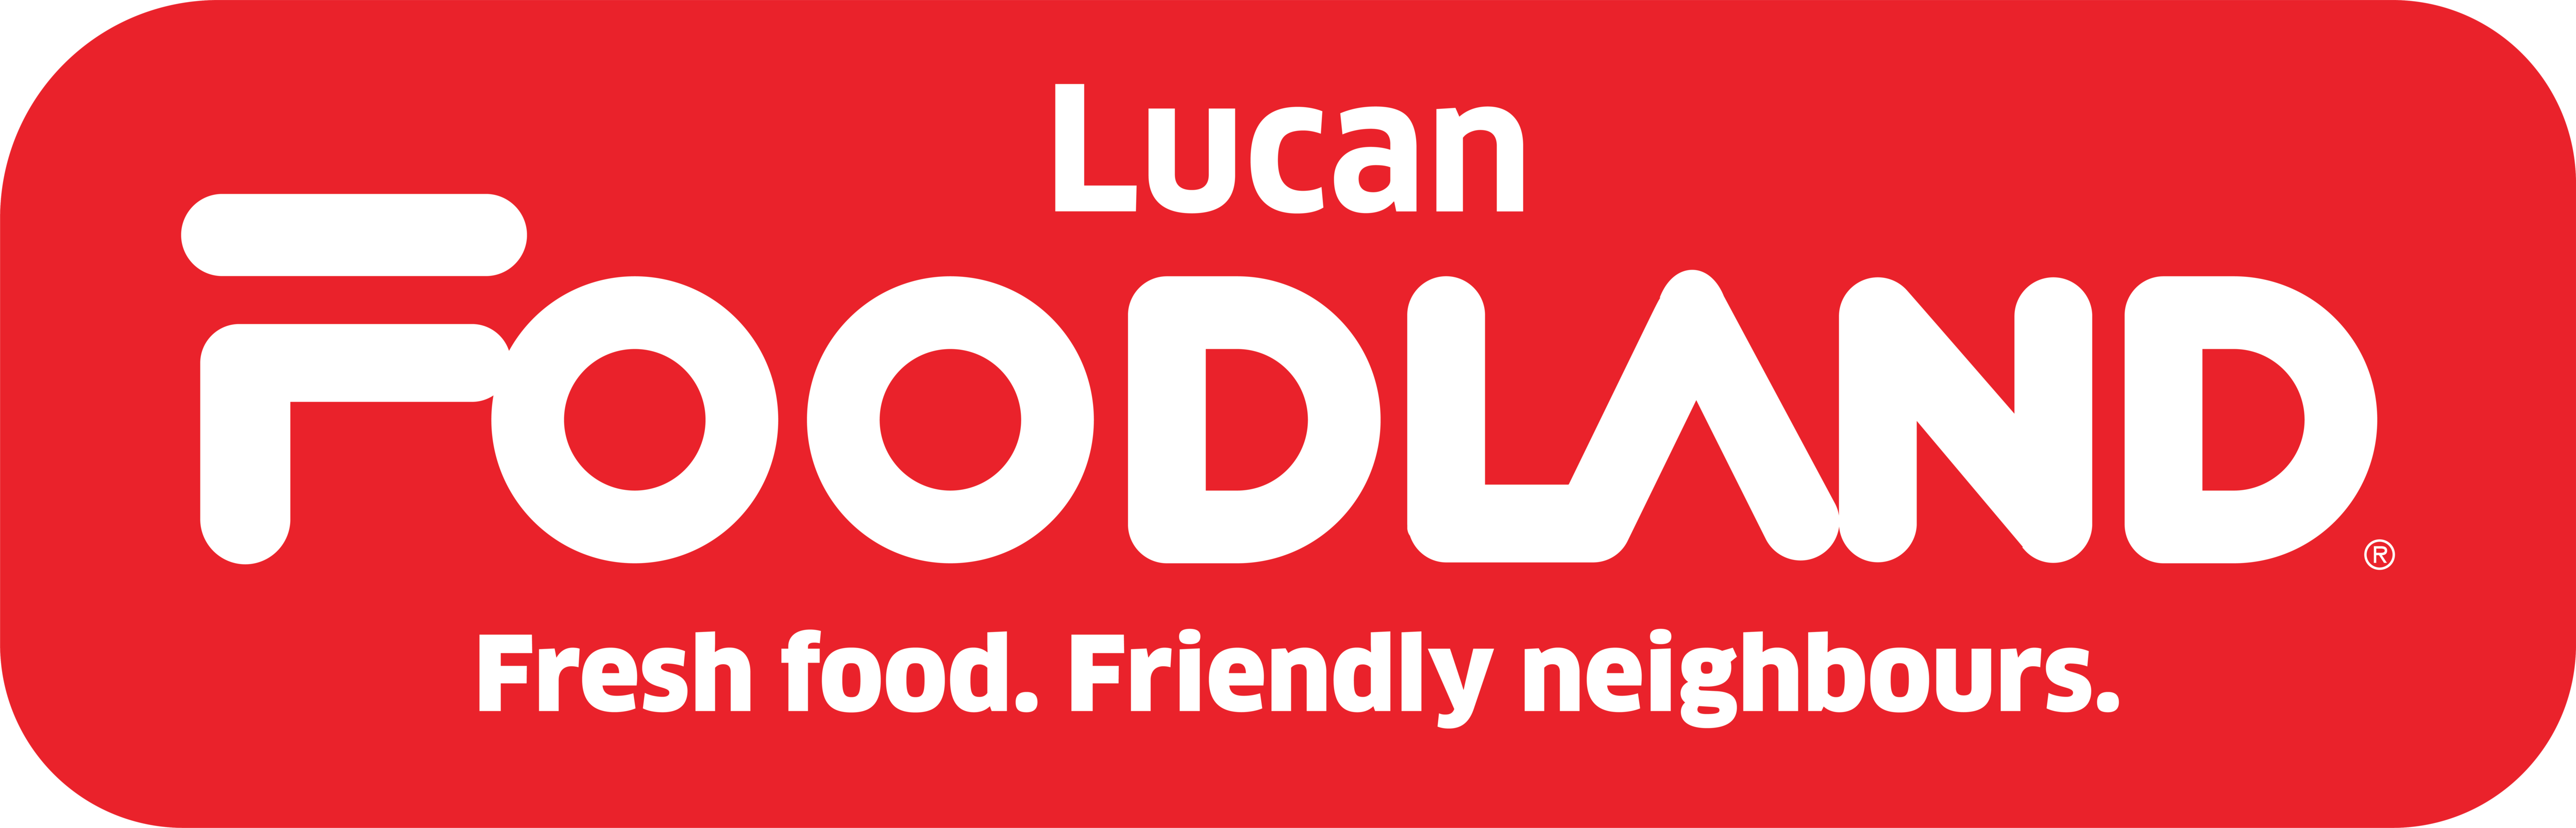 new_FDL_LUCAN.png